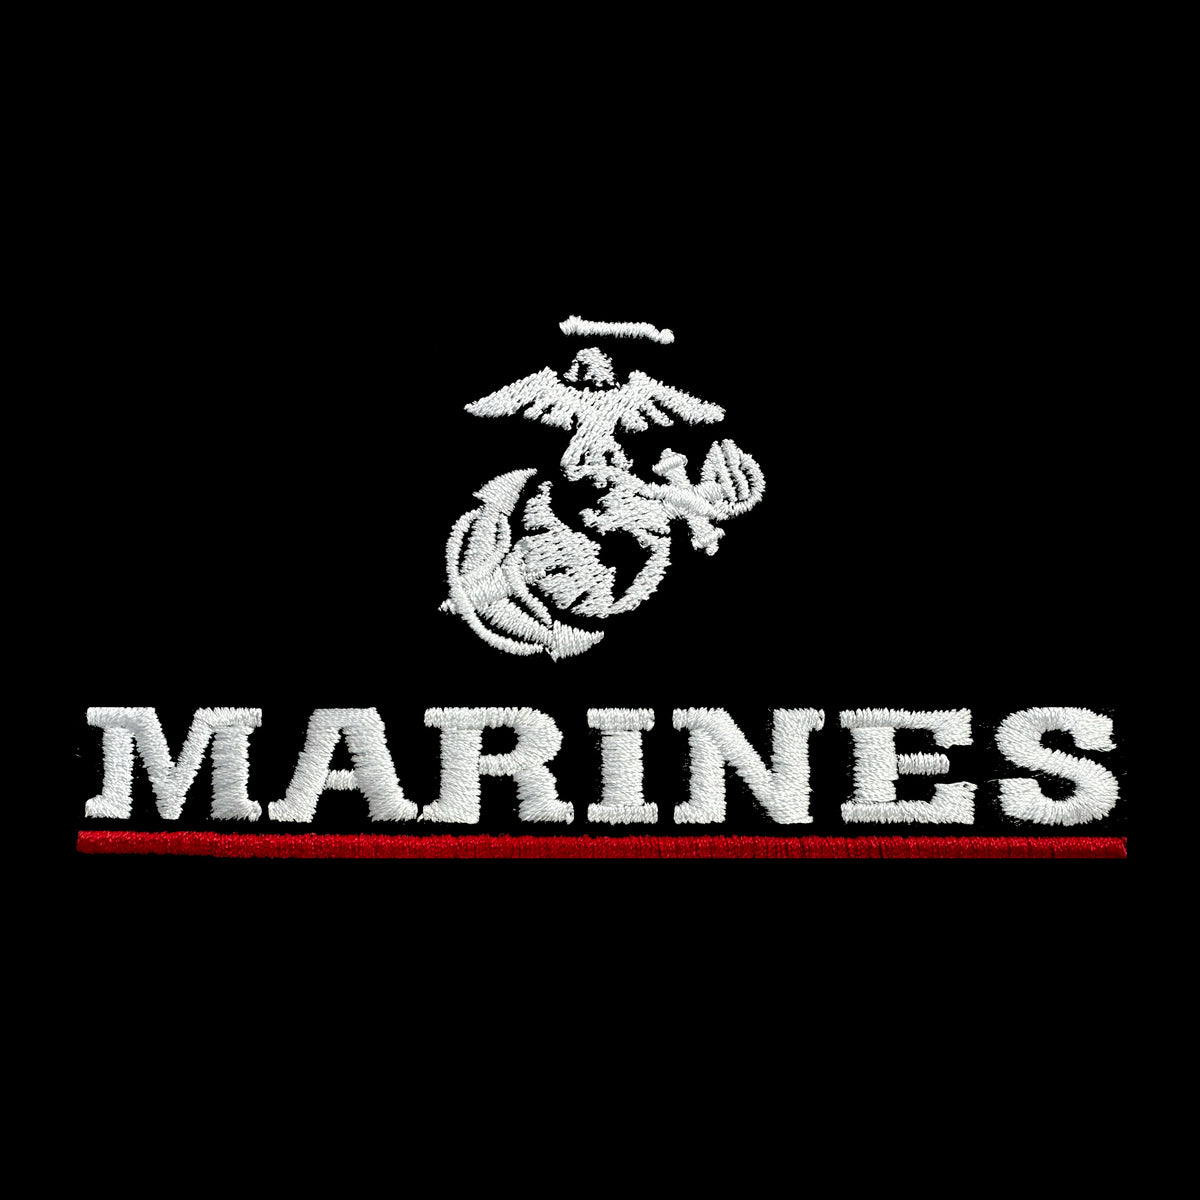 Marines Red Line Embroidered Hoodie